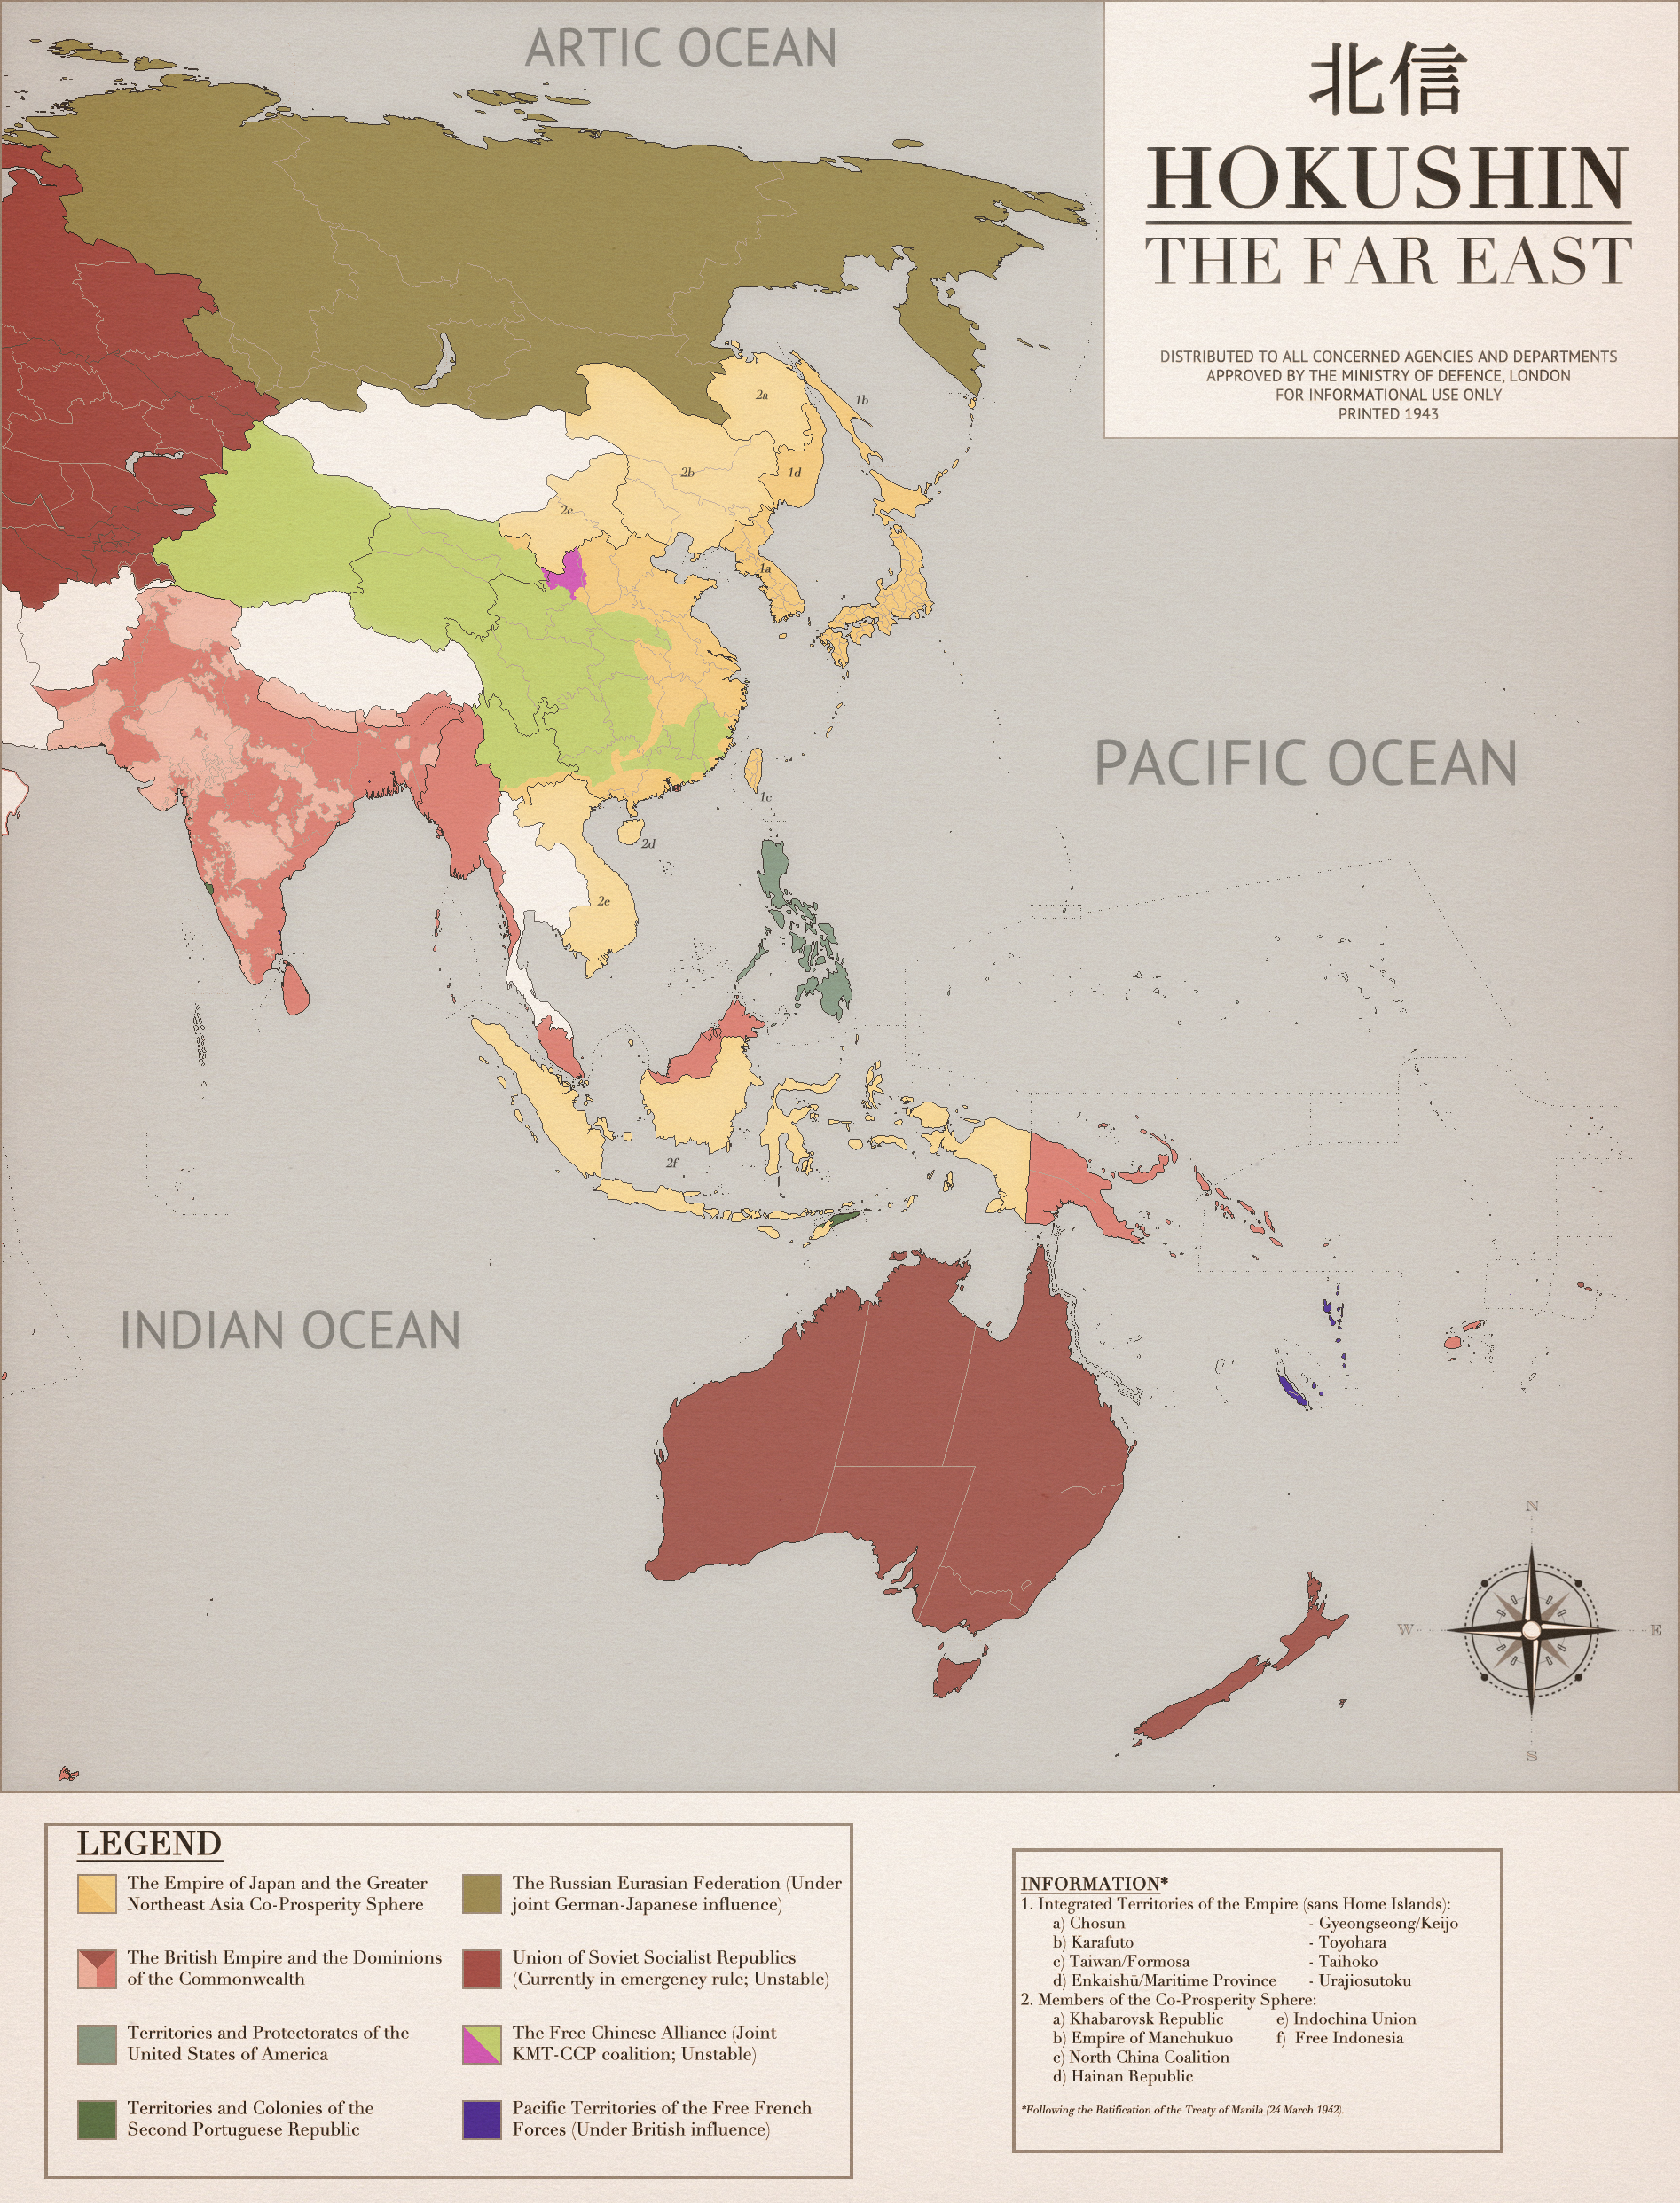 hokushin__east_asia_1943_by_mdc01957-d52g6xk.png